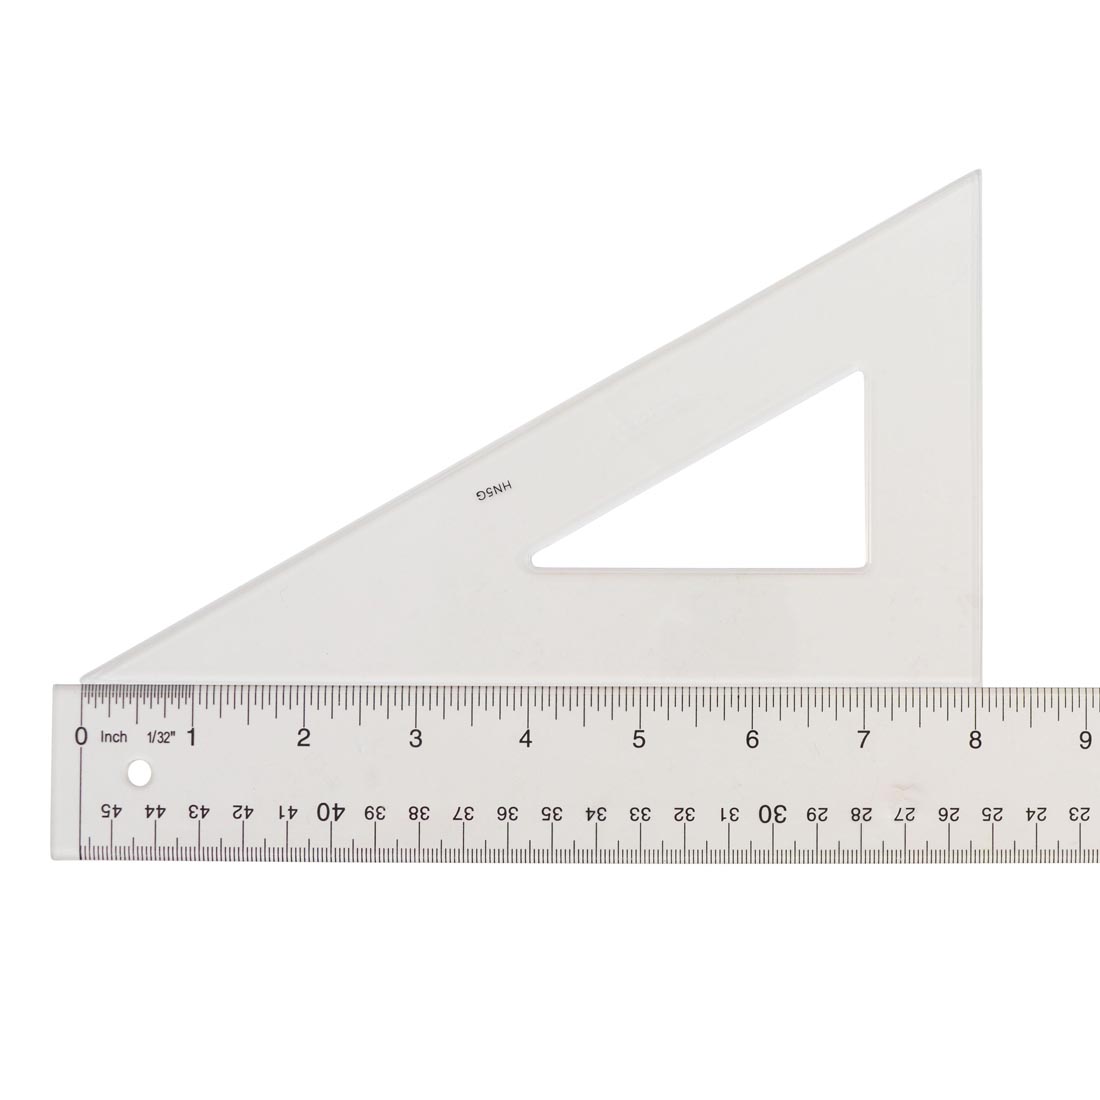 Triangular Scale with 30 and 60 Degree angles; shown with a ruler to measure the length of 8"